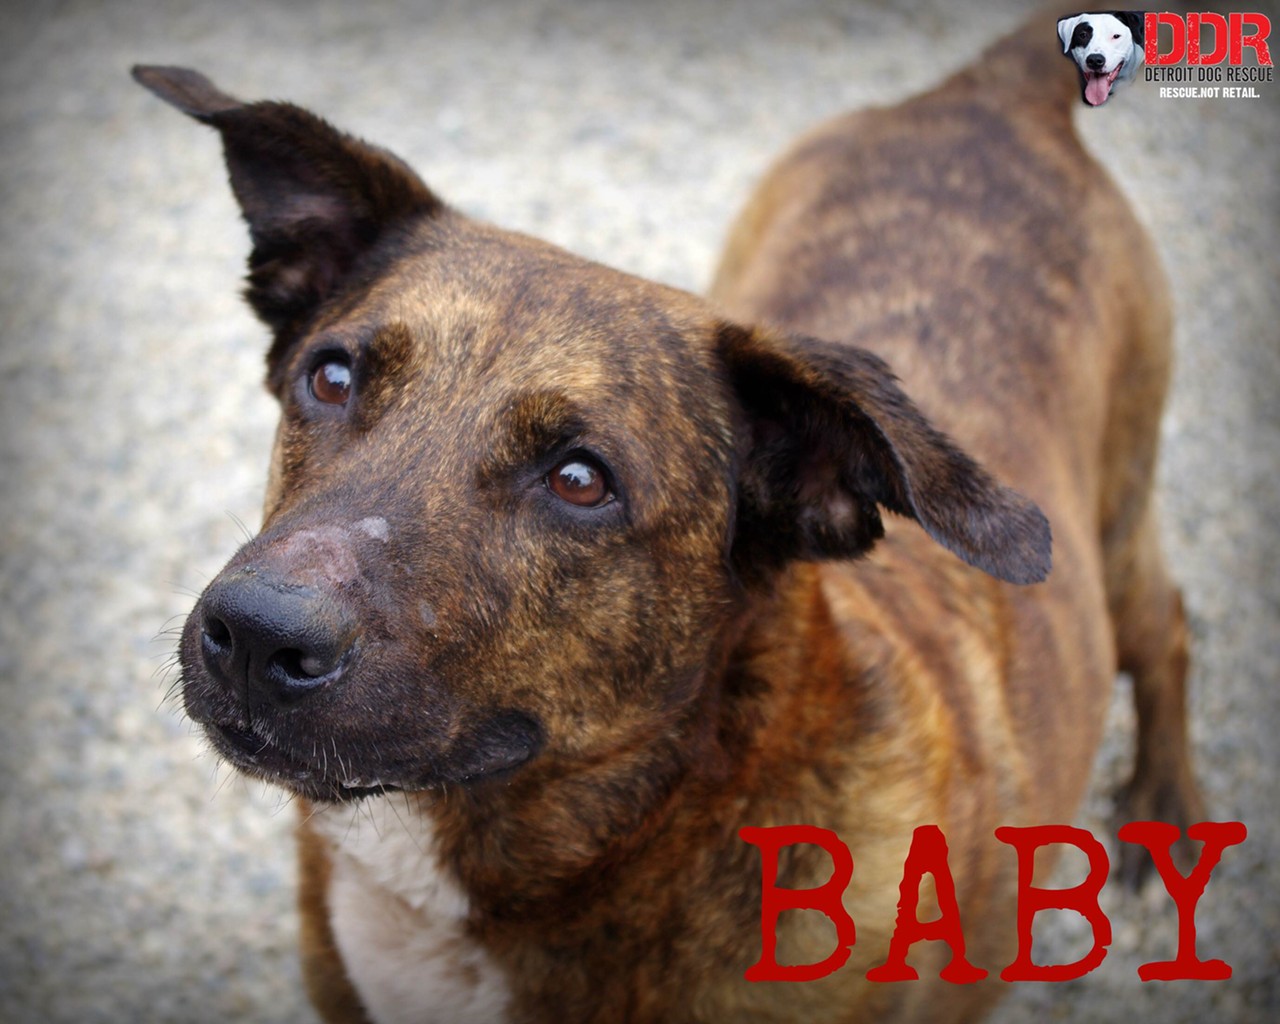 Baby is a seven year old senior who not only suffered a lifetime of abuse, she beat cancer. Baby loves children and is very gentle. She prefers to be the only dog in the home, but don't let that deter you, this girl will be your best friend forever.